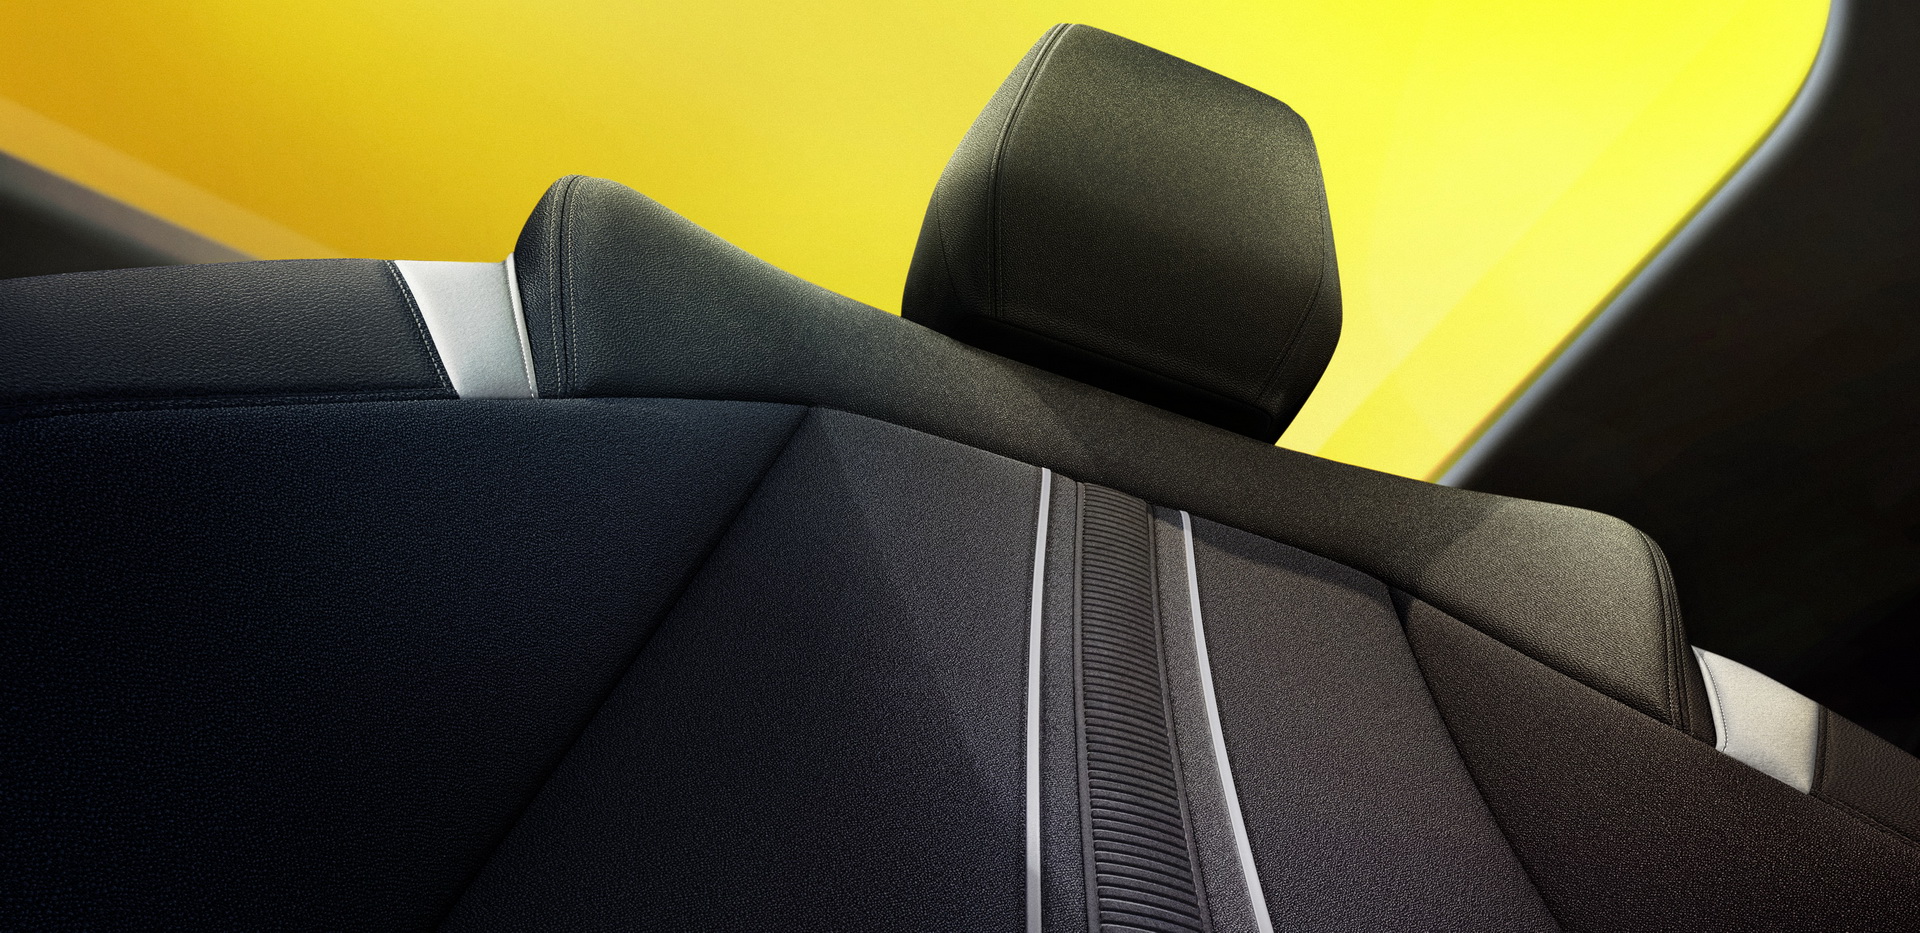 2022 Opel Astra Interior Seats Wallpapers #24 of 25